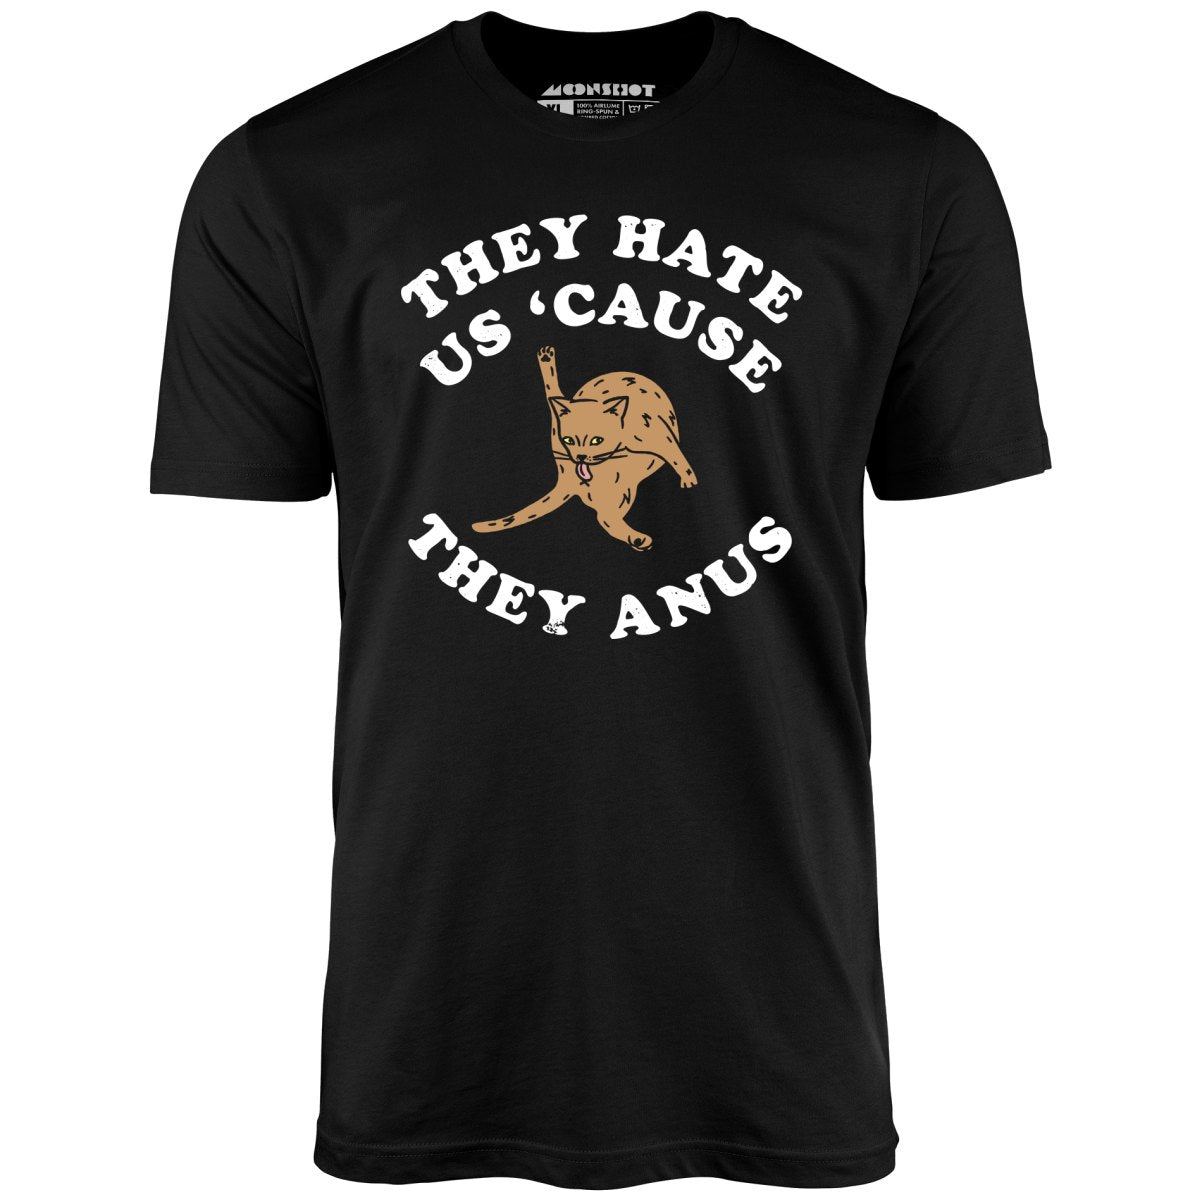 They Hate Us Cause They Anus - Unisex T-Shirt